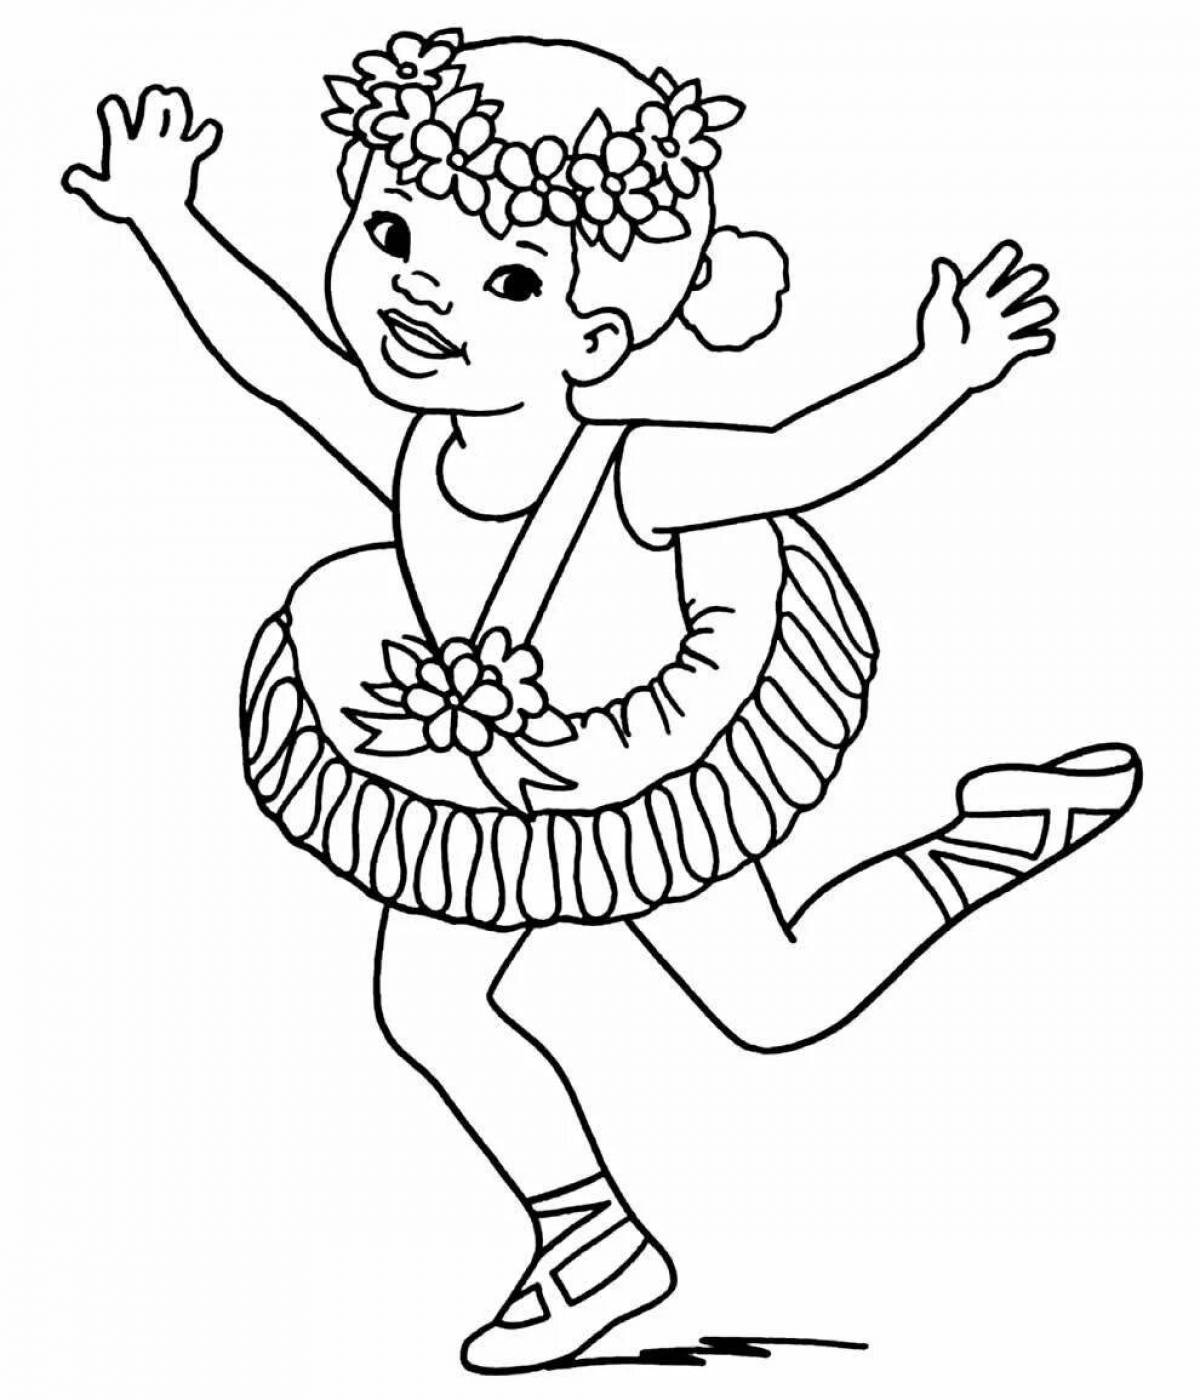 Animated dance coloring book for kids